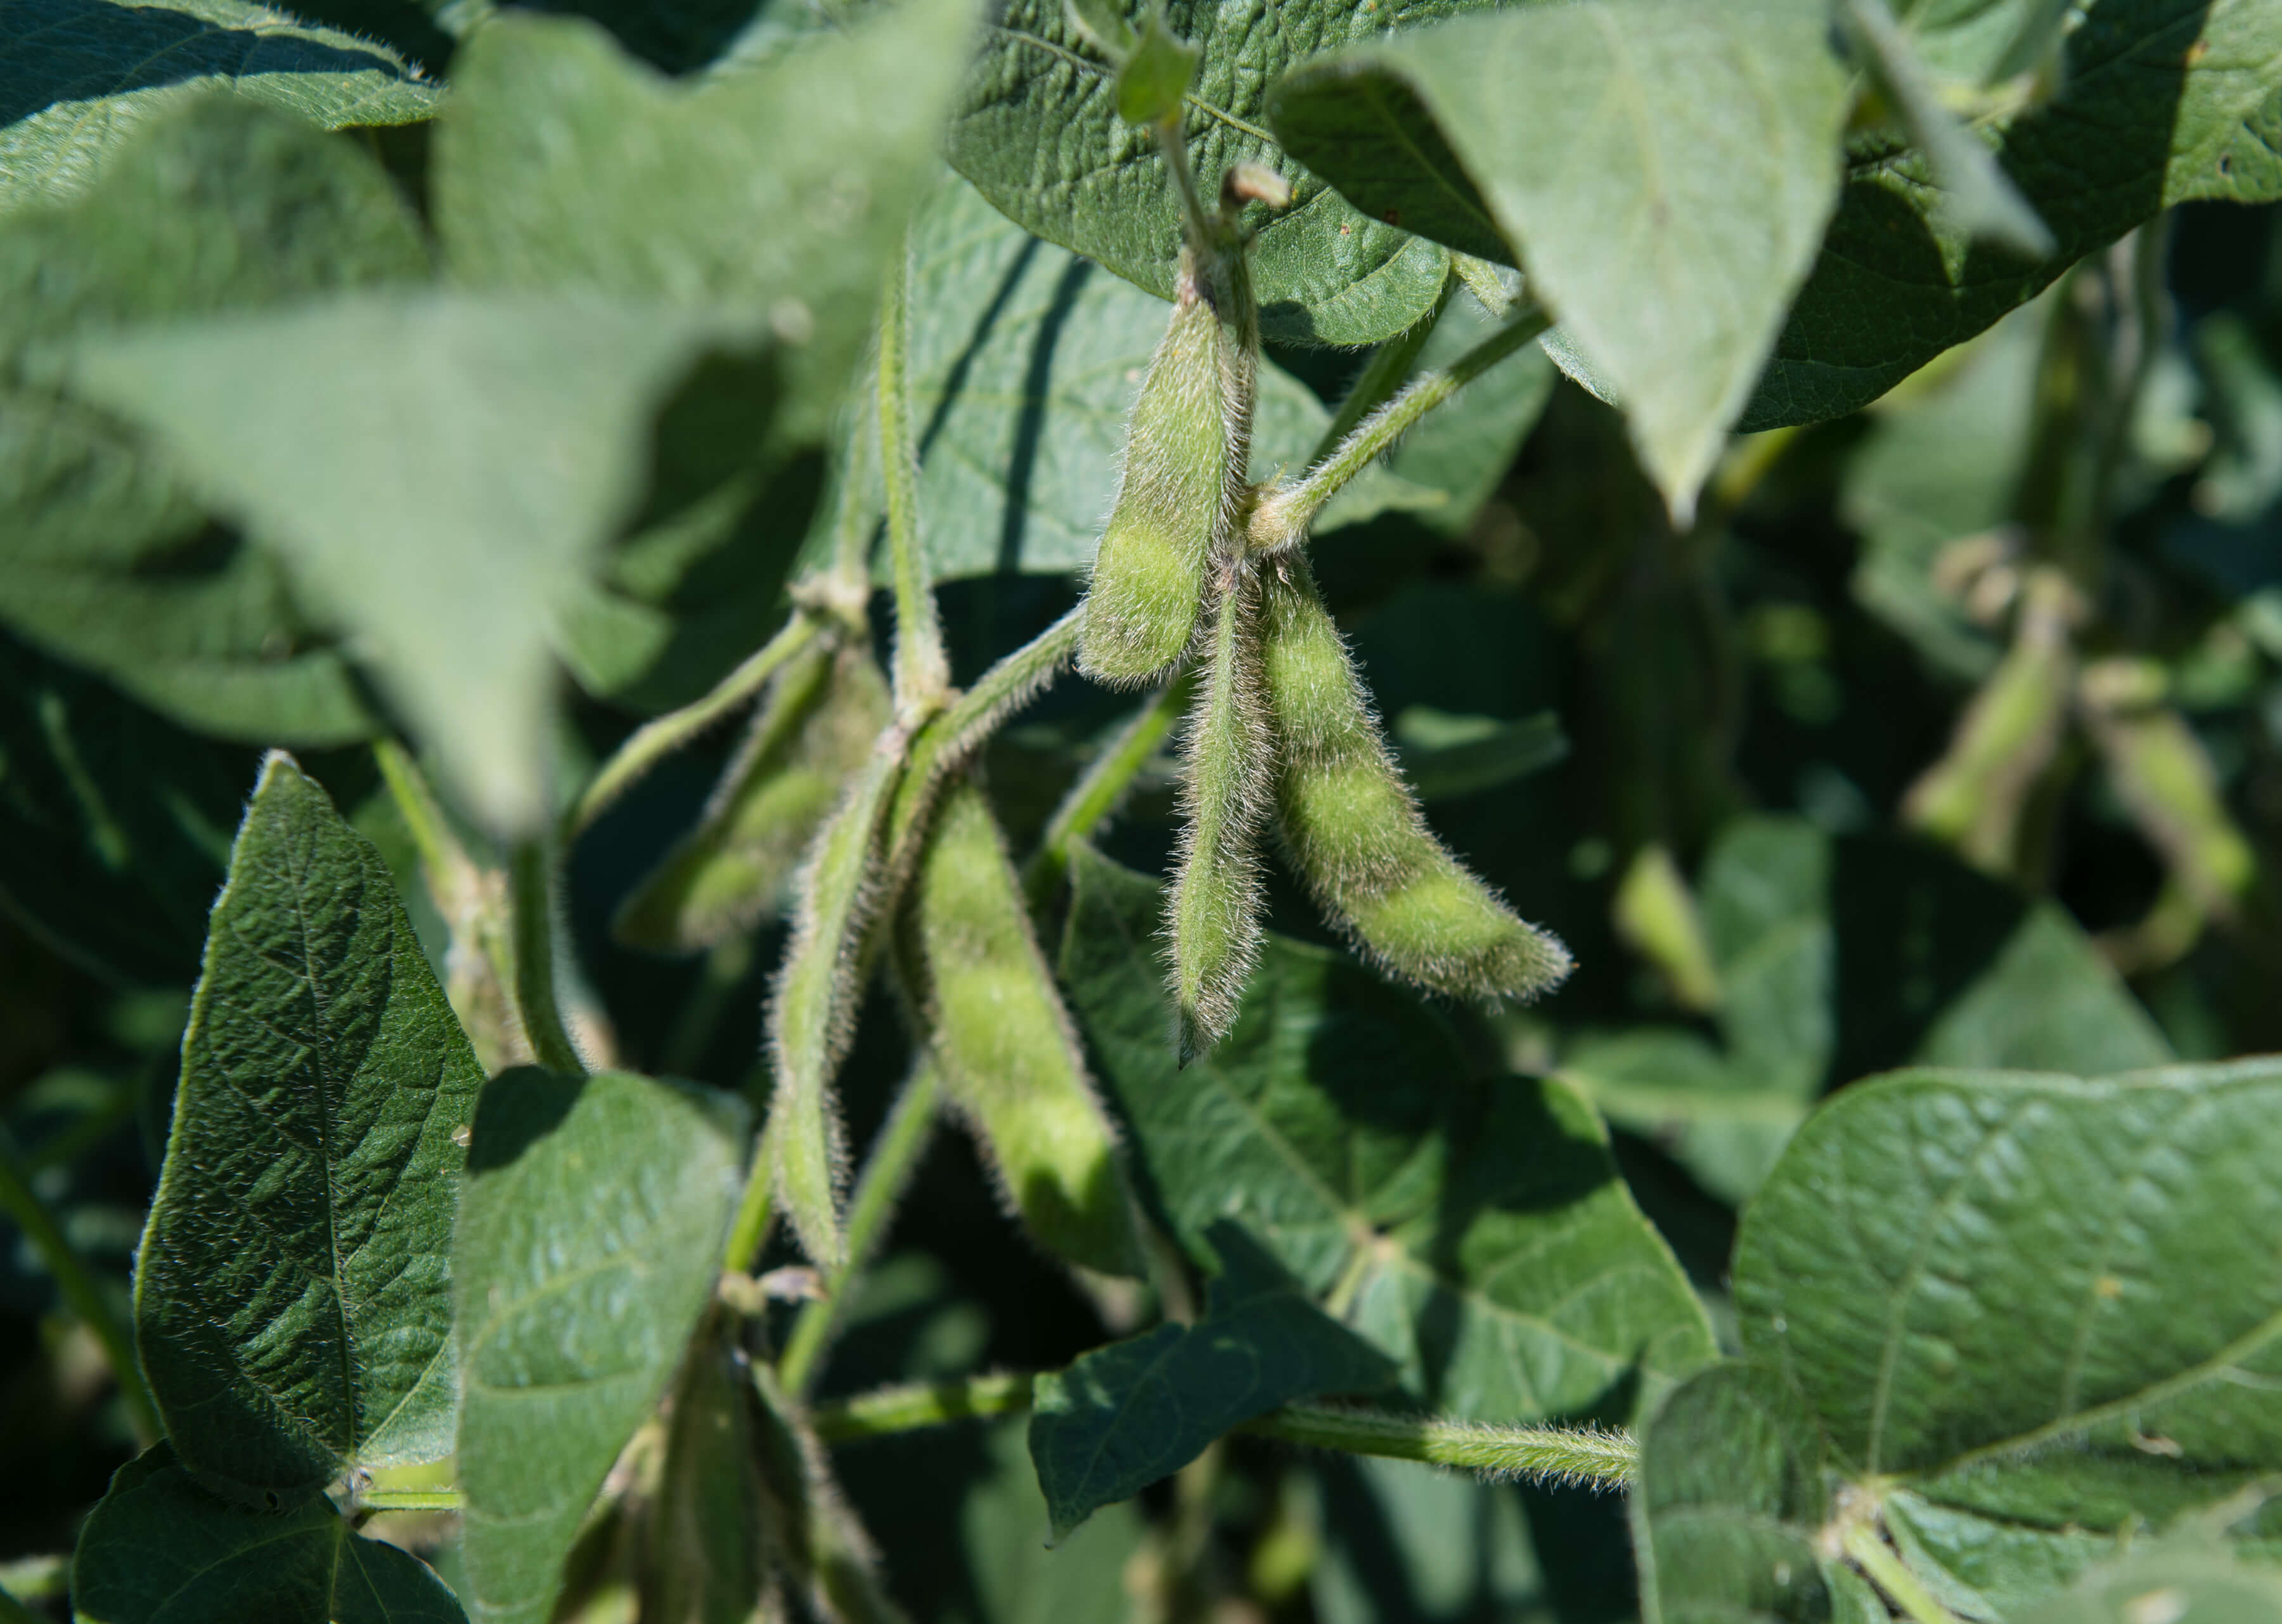 Soybean pods hanging from a soybean plant